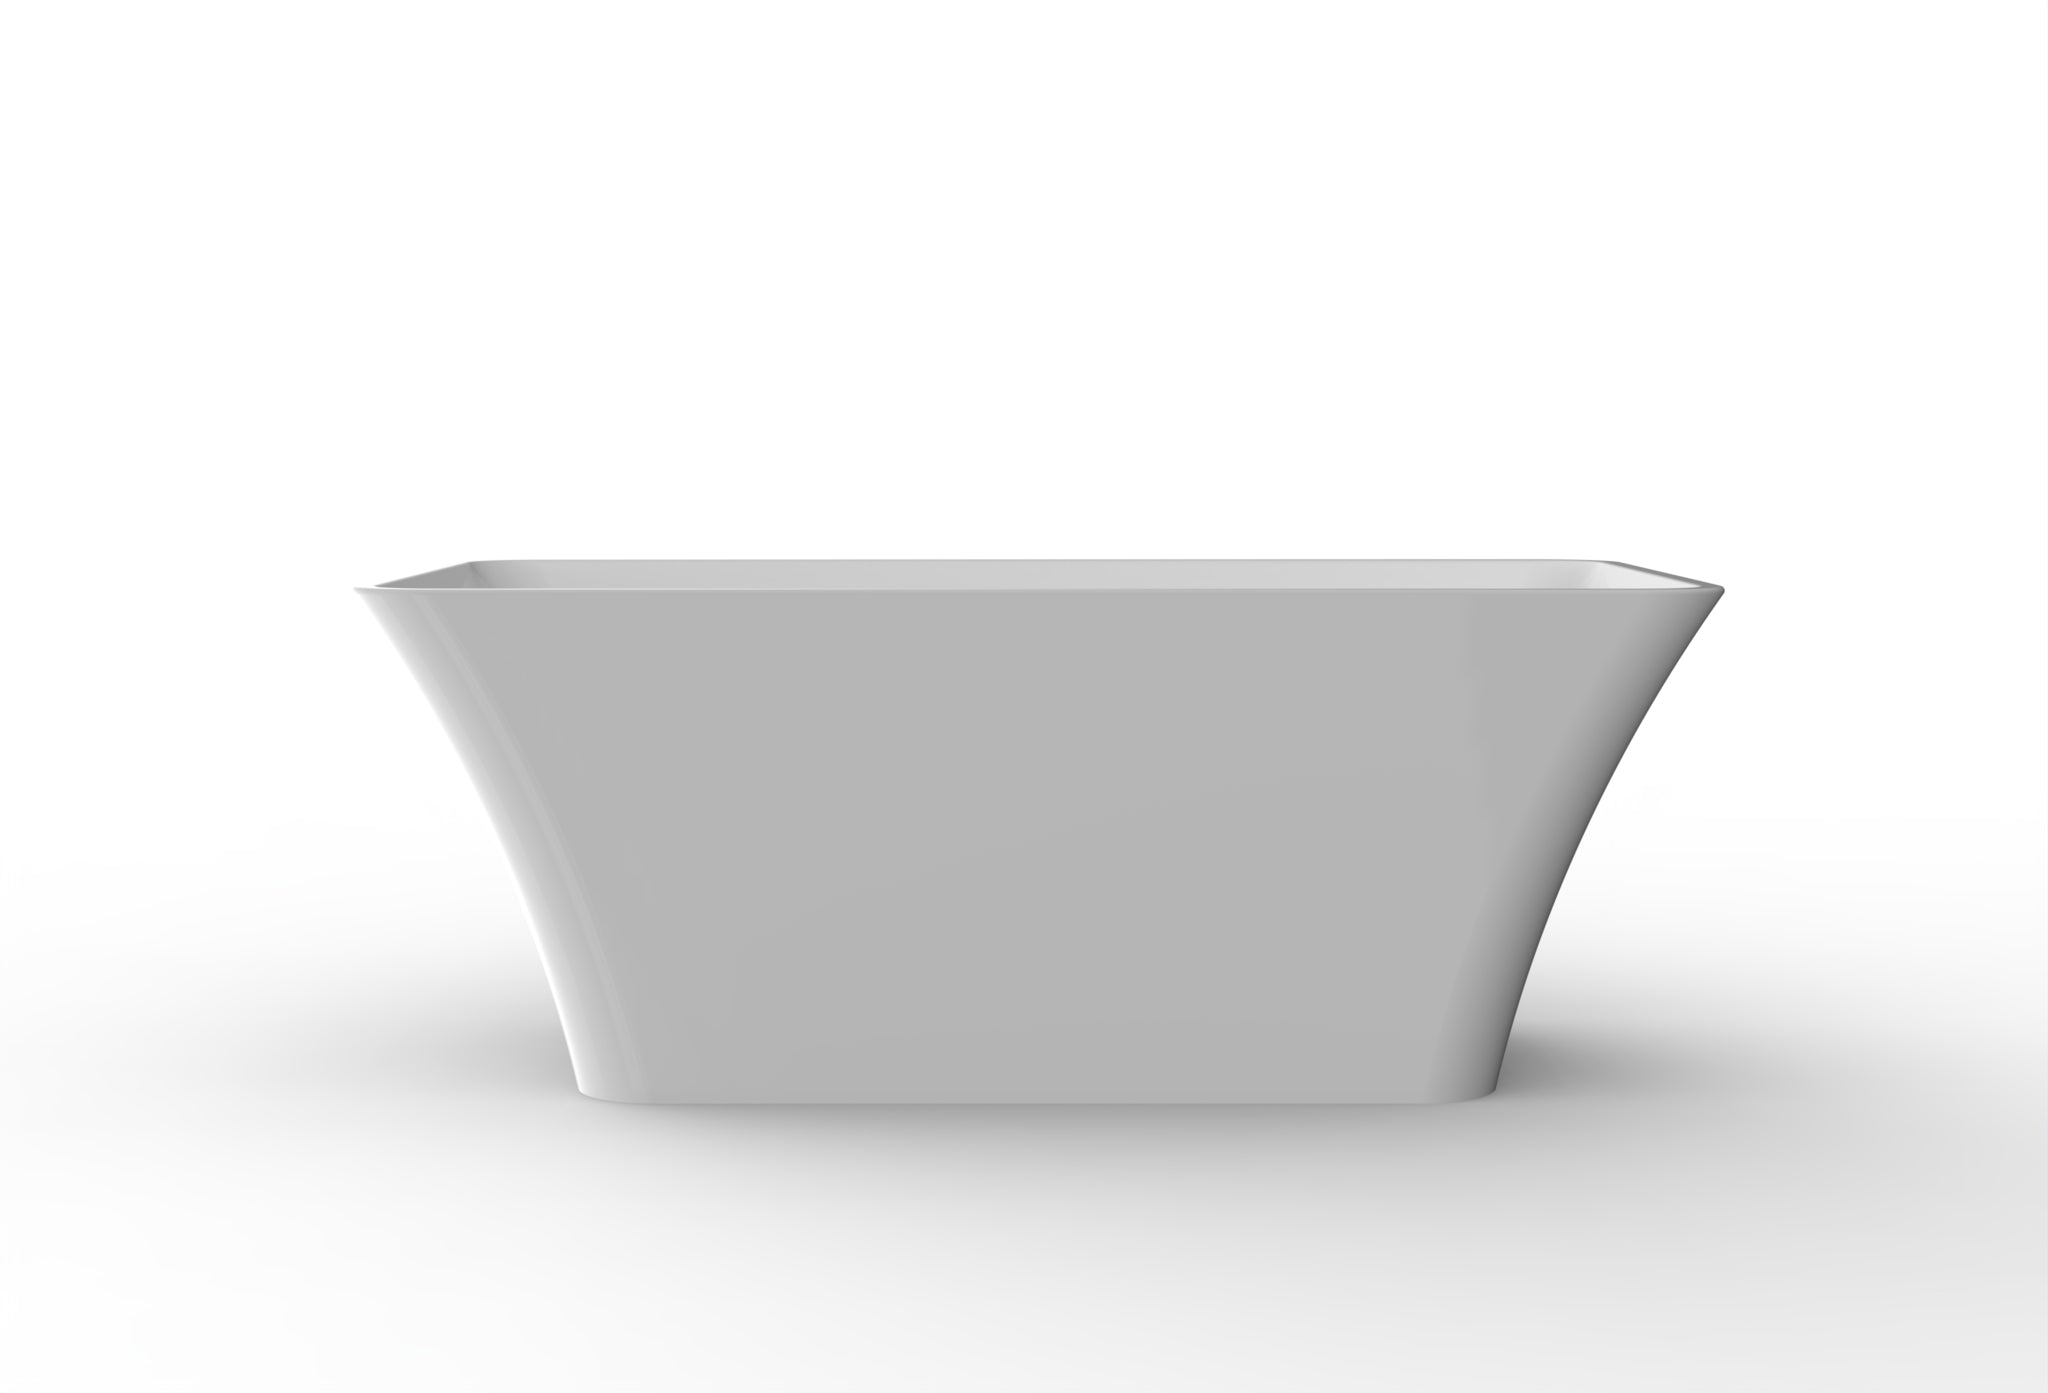 Liberty Bath Tub 59 White Acrylic Free Standing Soaker, Center Drain And Overflow